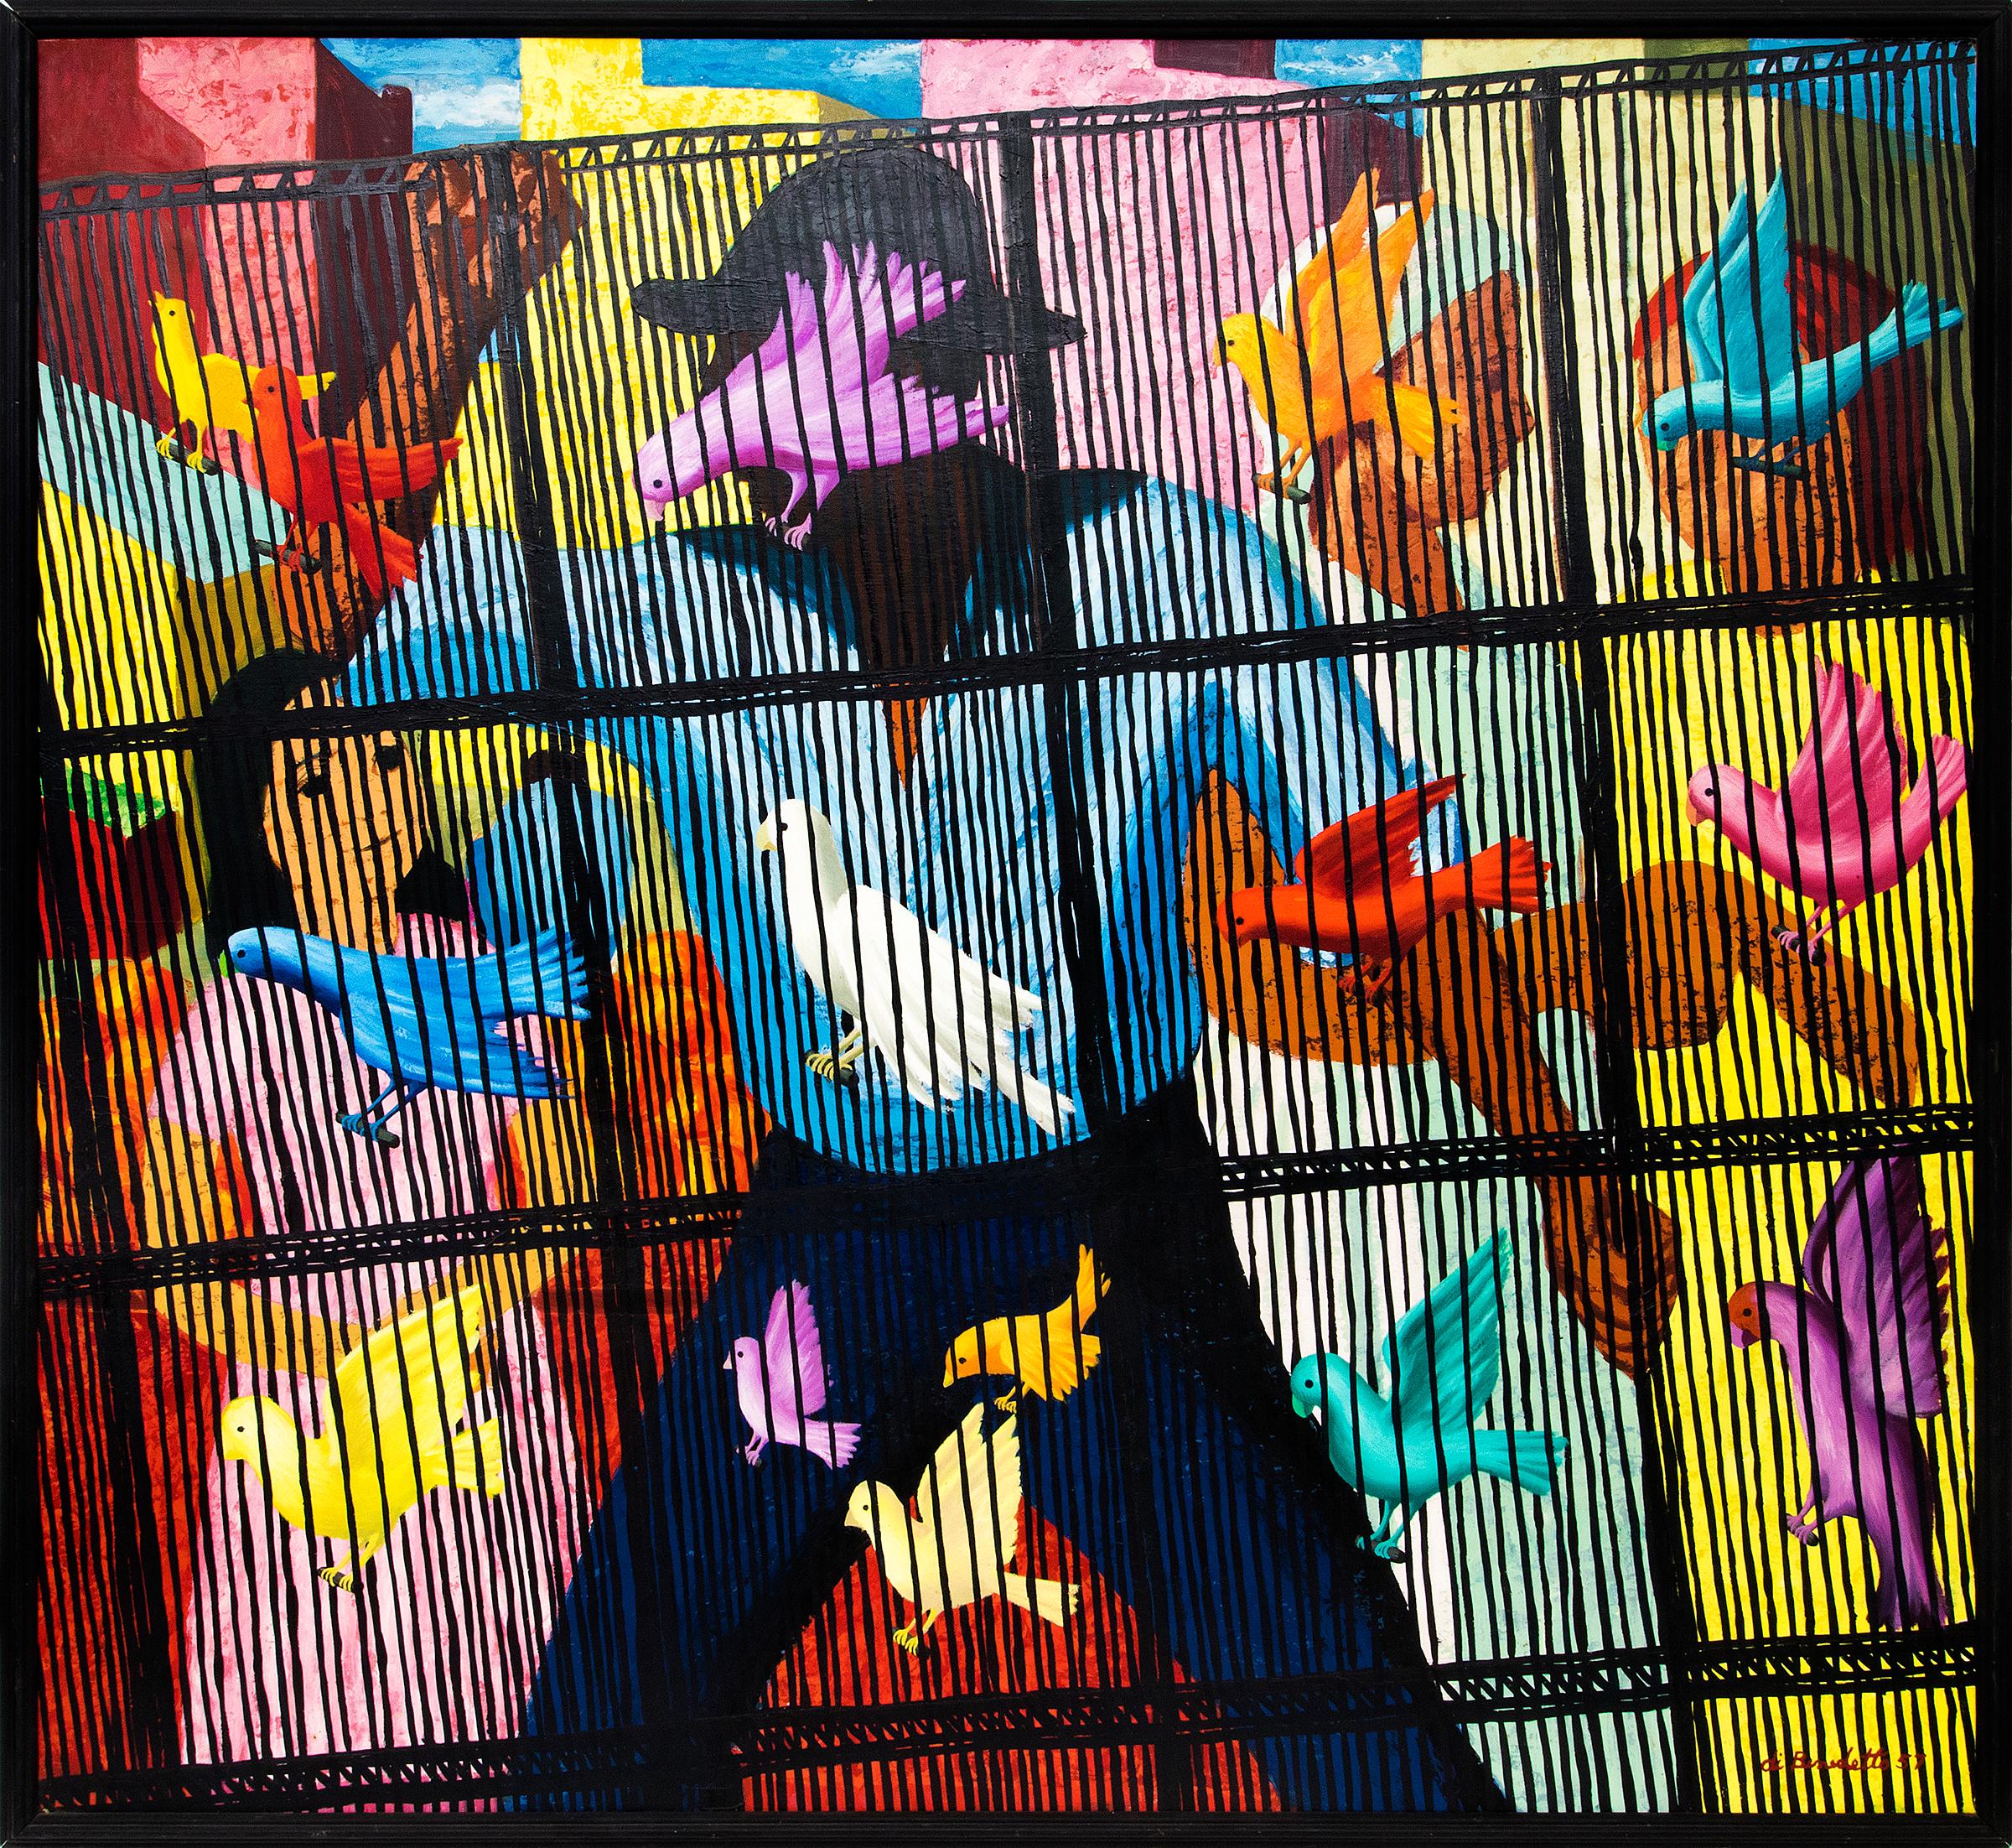 Birdcage, 1950s Framed Modernist Oil Painting, Bright Colored Figures and Birds